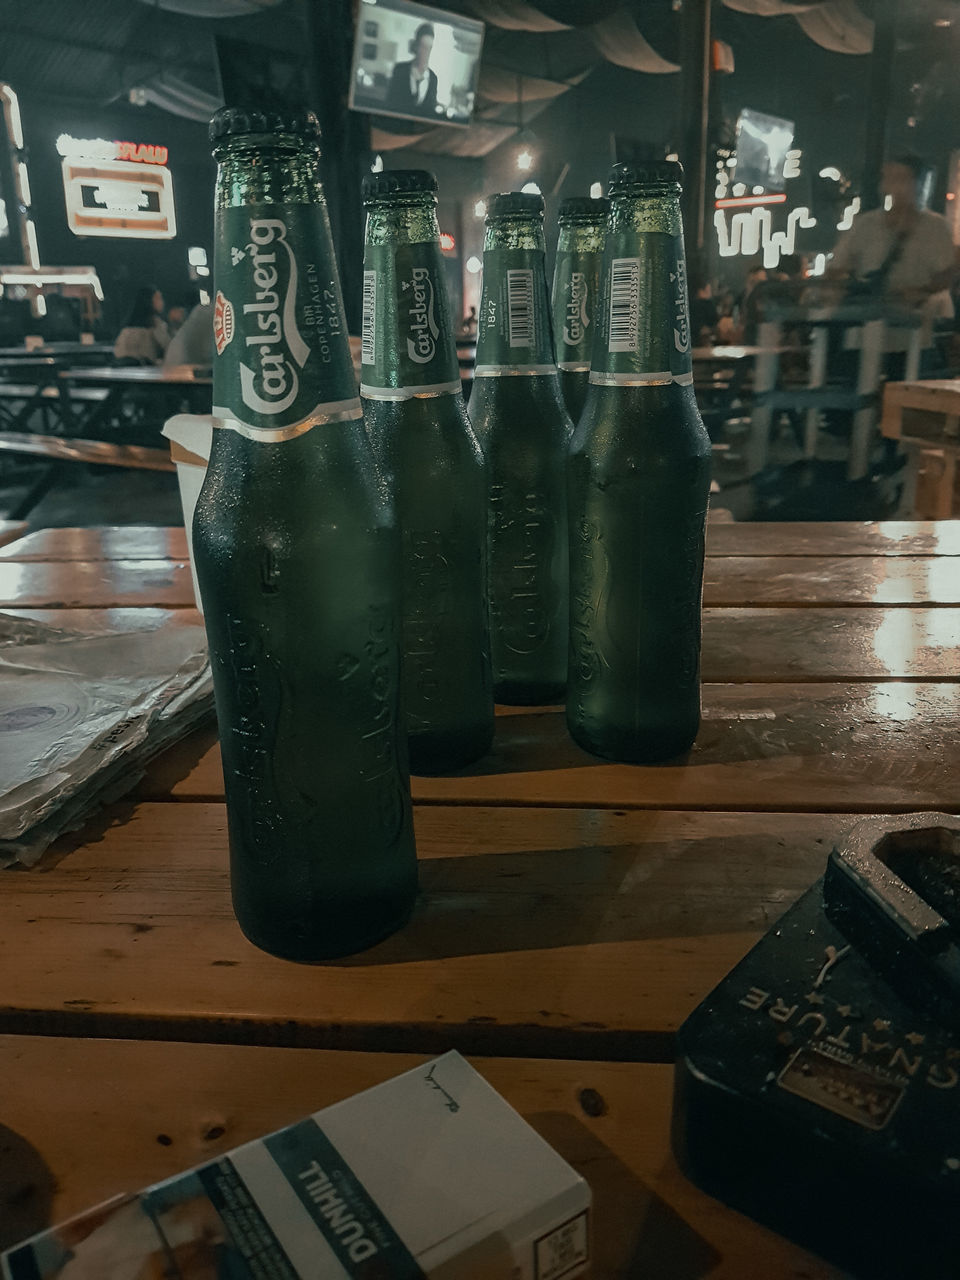 CLOSE-UP OF BEER BOTTLES ON TABLE